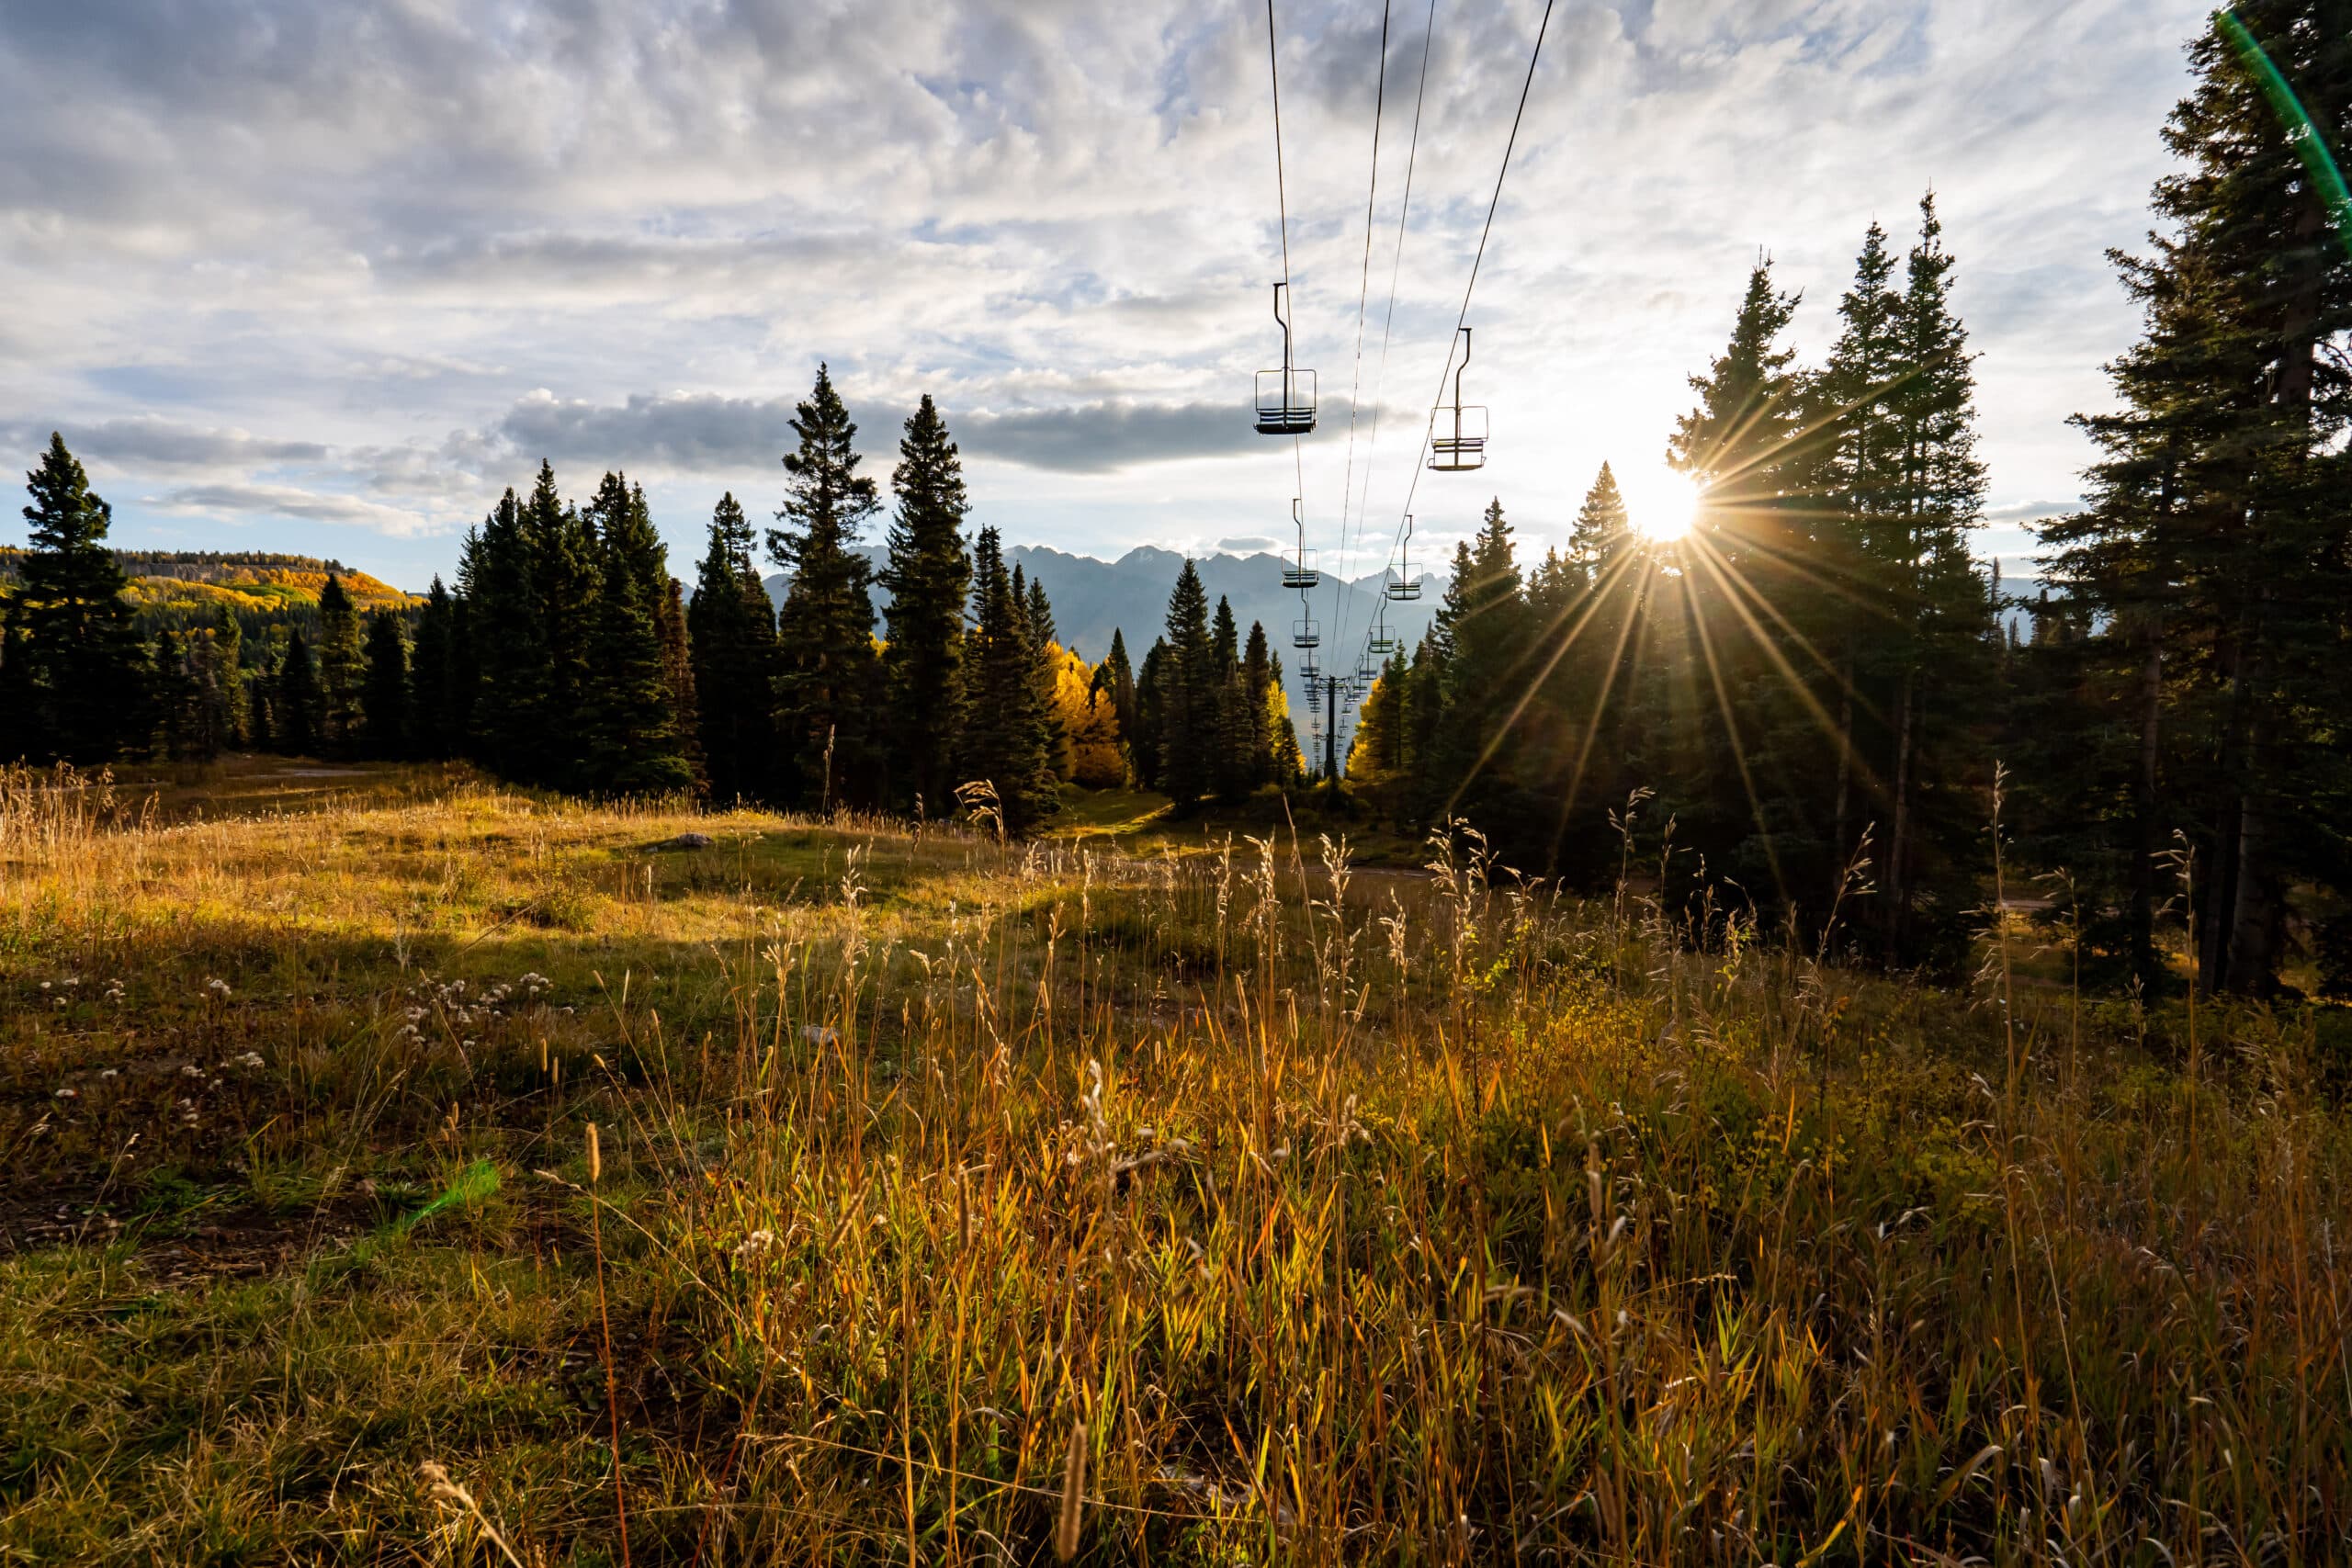 Late summer sun on mountain side grass with a ski lift silhouetted against the sky.